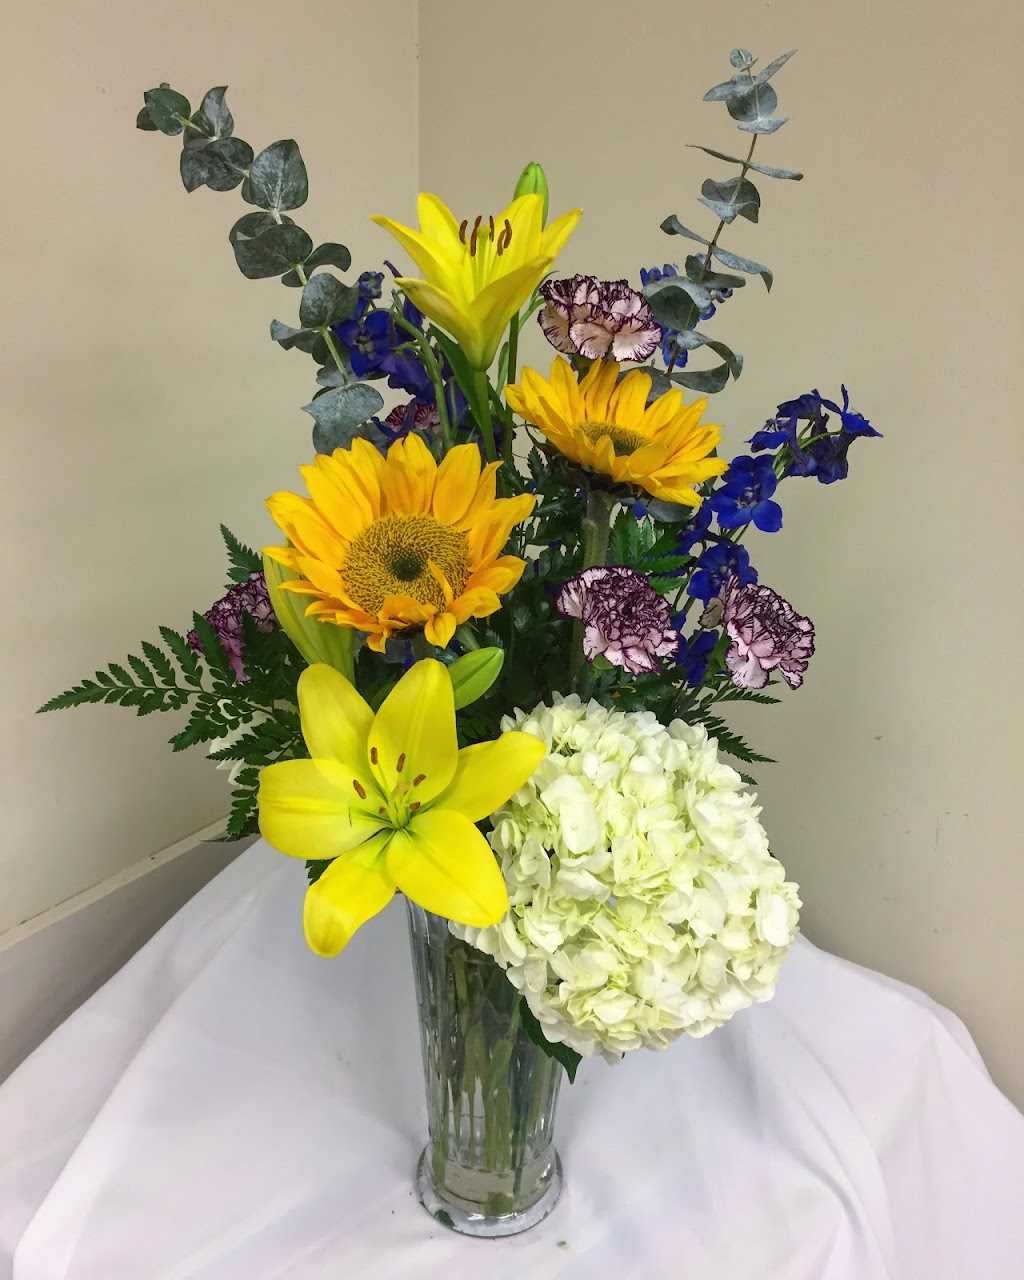 Genuardi Florist | 850 S Valley Forge Rd, Lansdale, PA 19446 | Phone: (215) 855-3850